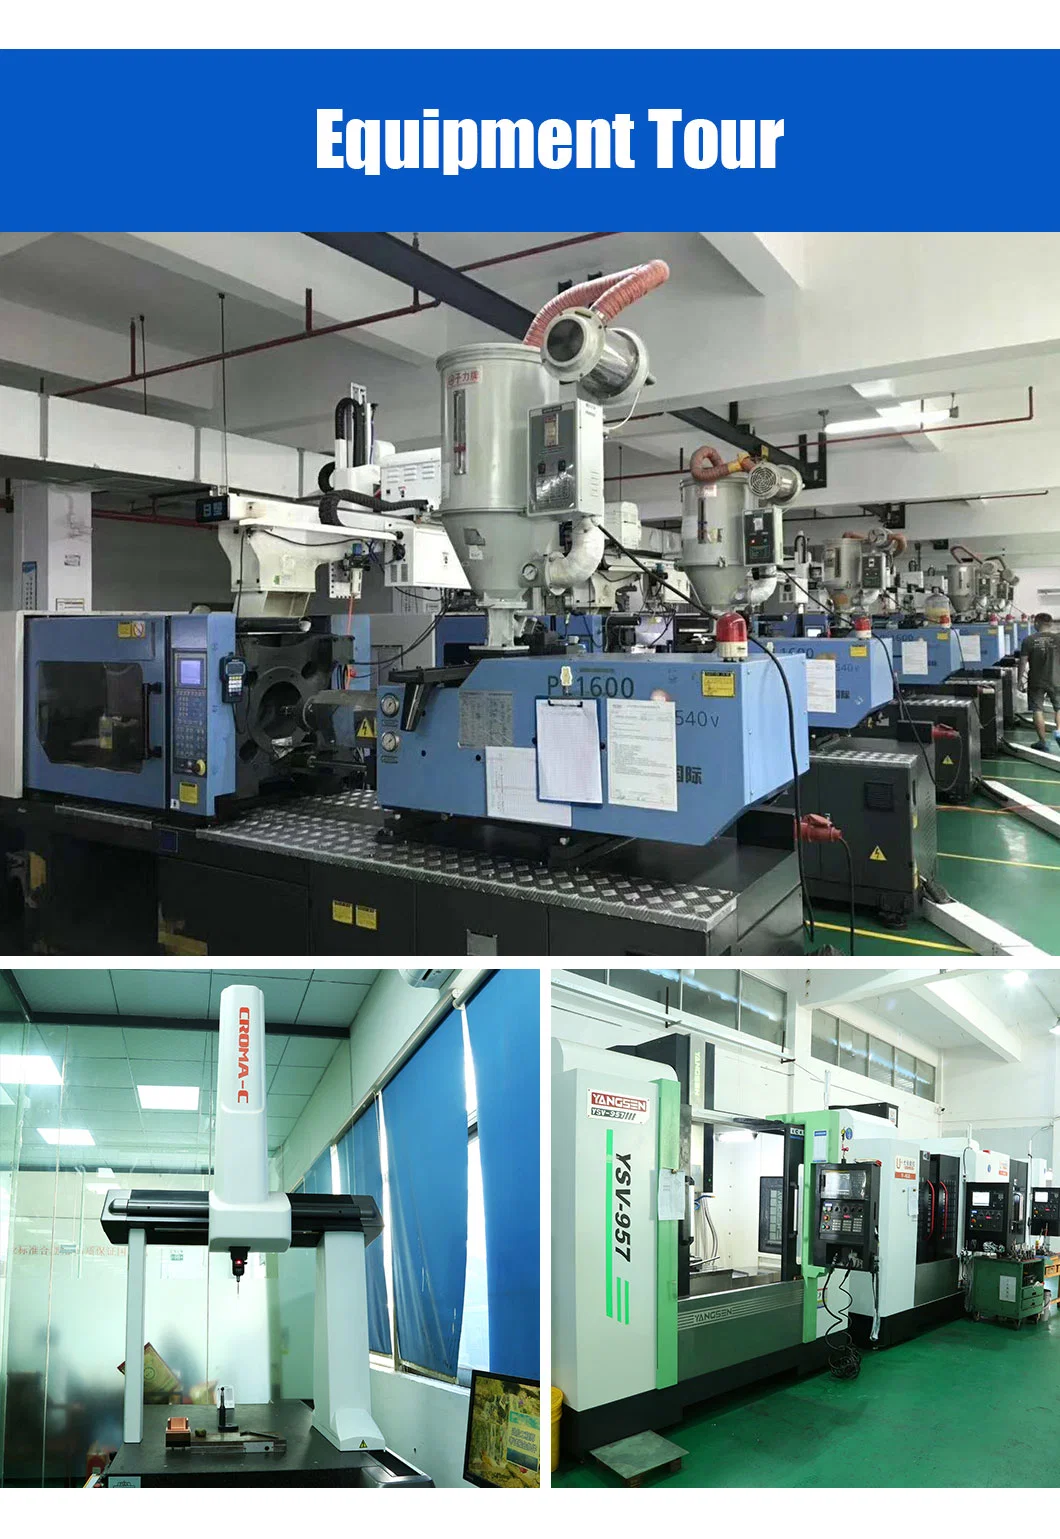 Precision Rapid Low Volume Polypropylene Polymer Polycarbonate Injection Moulder Industrial Molds Tooling and Medical Thermoplastic Molding Manufacturer